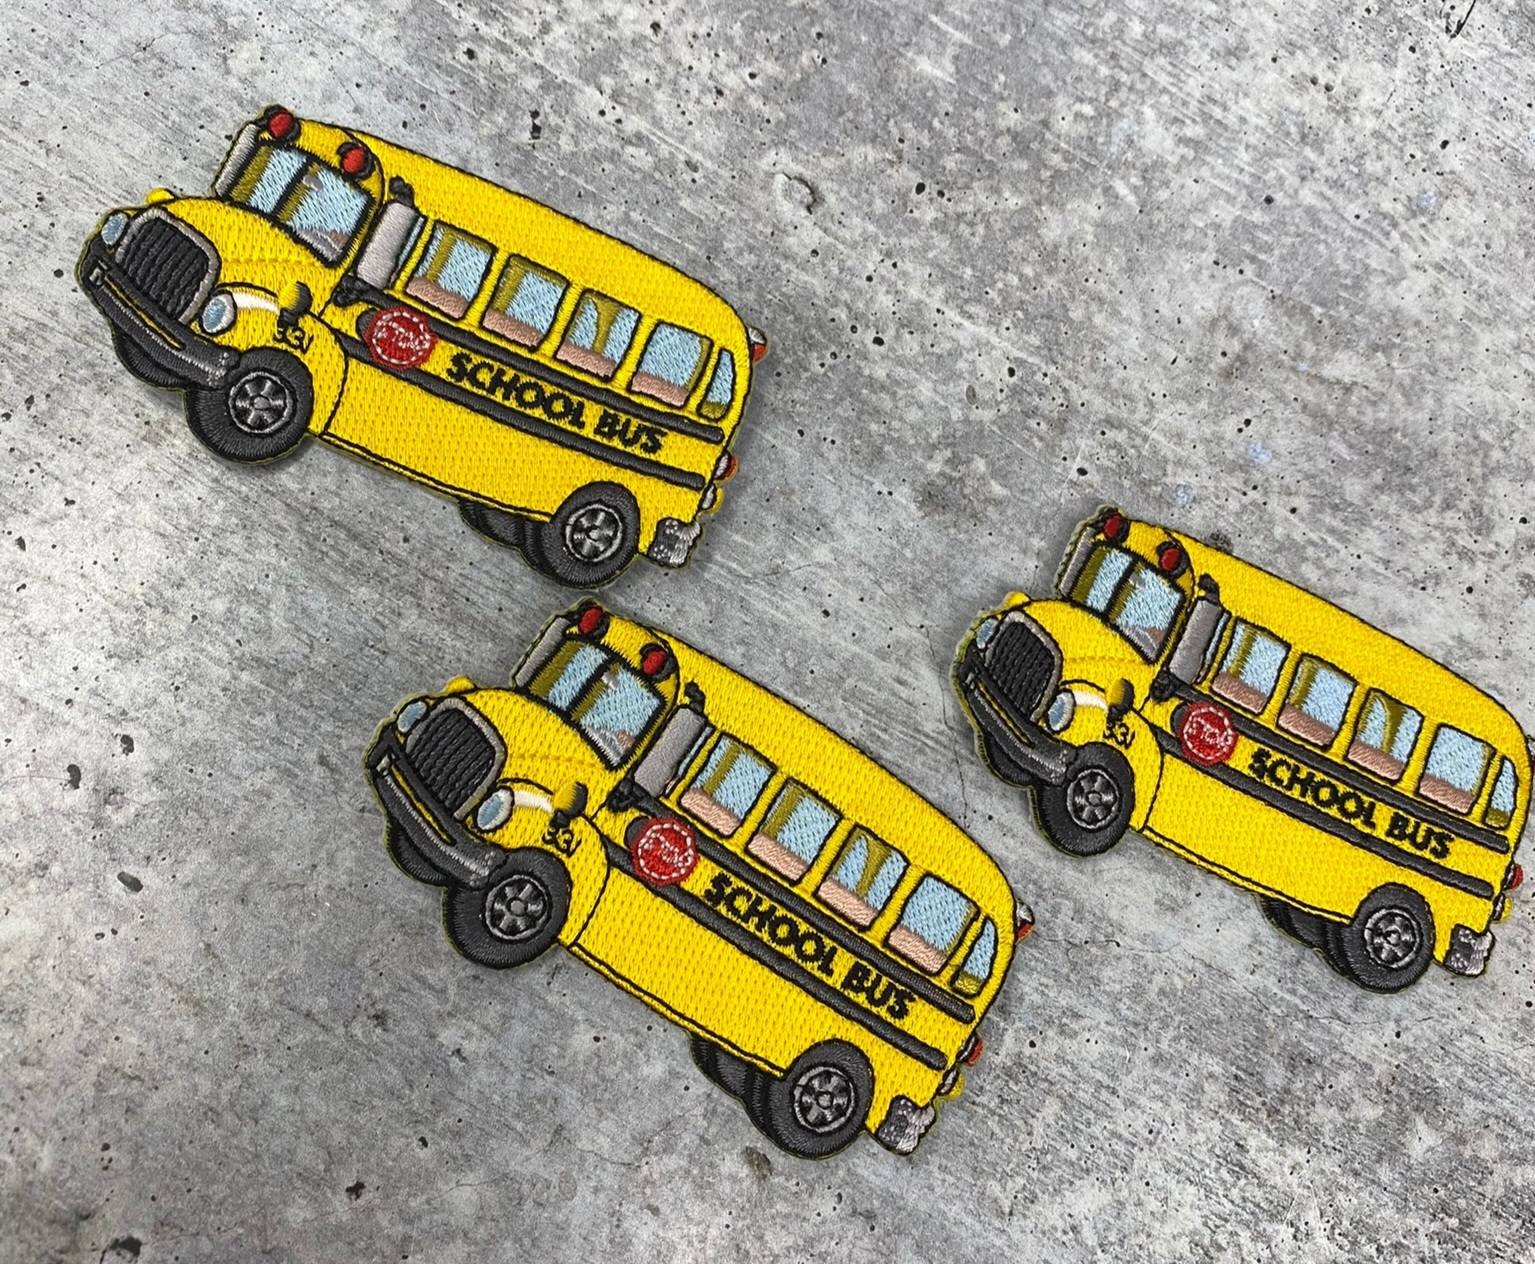 NEW Arrival,"School Bus" 100% Embroidered Patch, Small Iron-on Embroidered, Size 3.5", Cute Yellow Badge for Jackets, Hats, Camos, and Crocs